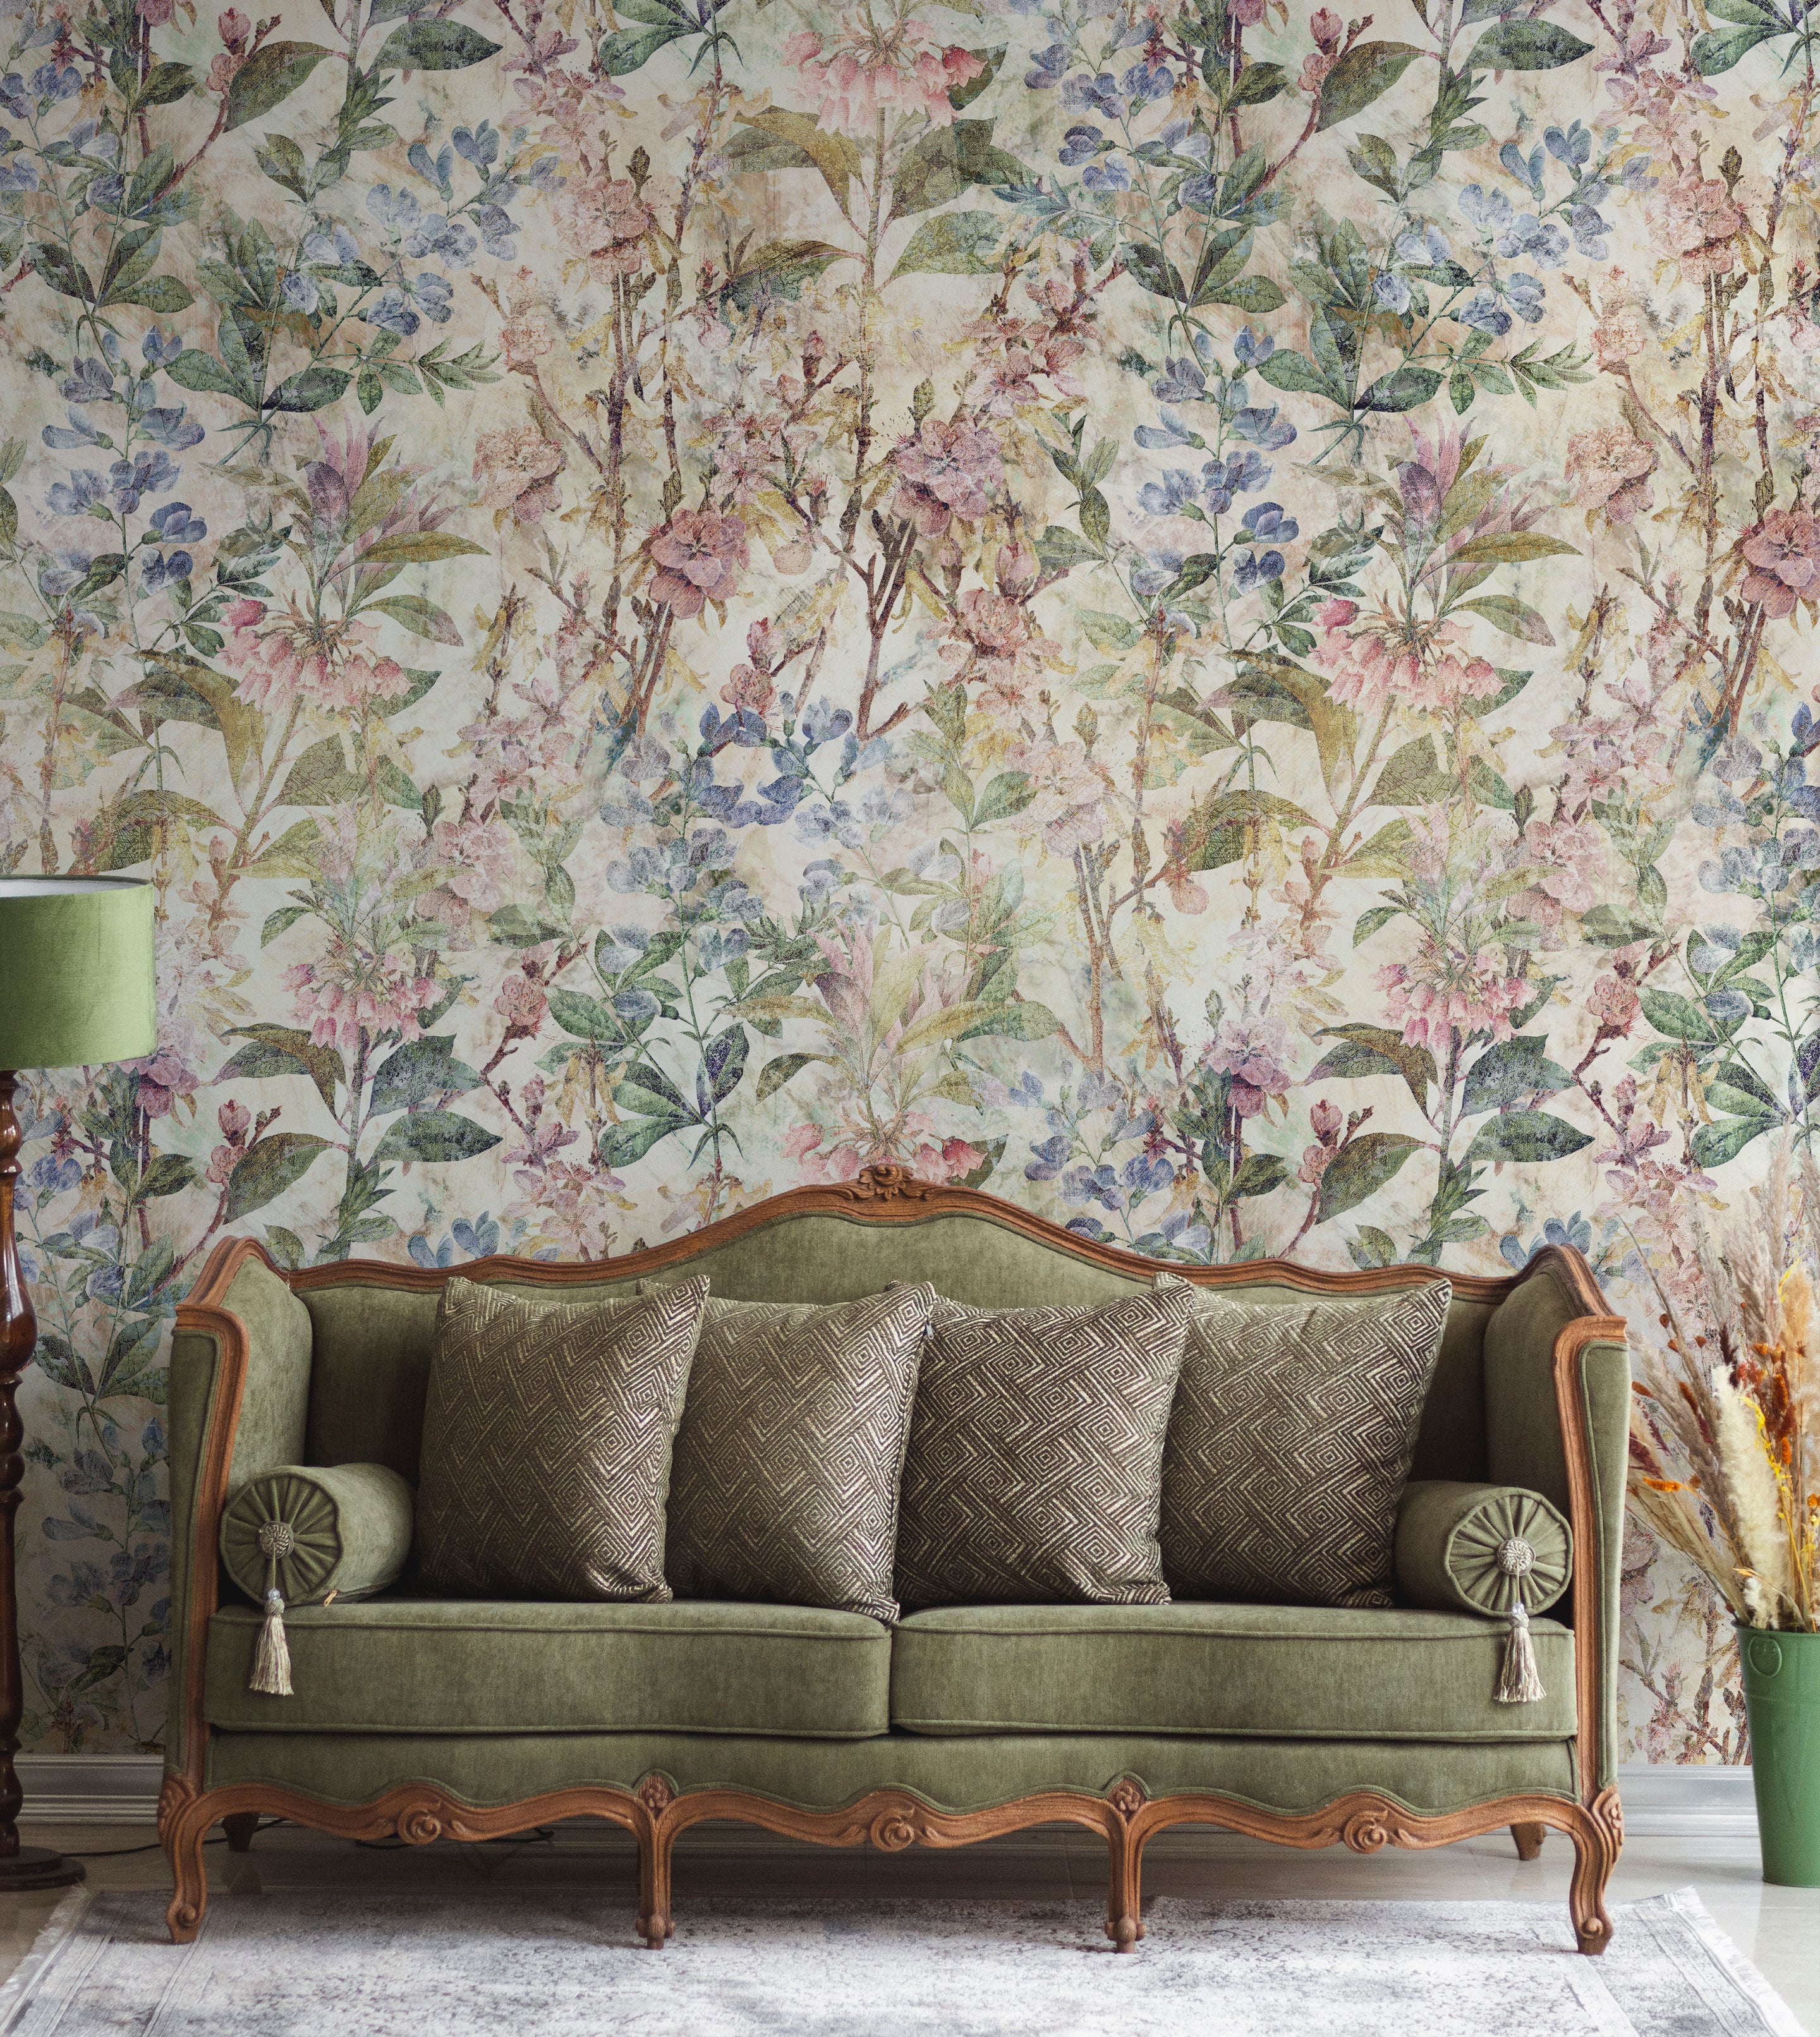 A luxurious living room setting with the "Ancient Florals Wallpaper" enveloping the space in a tapestry of soft, vintage floral designs. A classic green velvet couch sits against the wallpaper, perfectly complemented by the naturalistic elements of the decor.